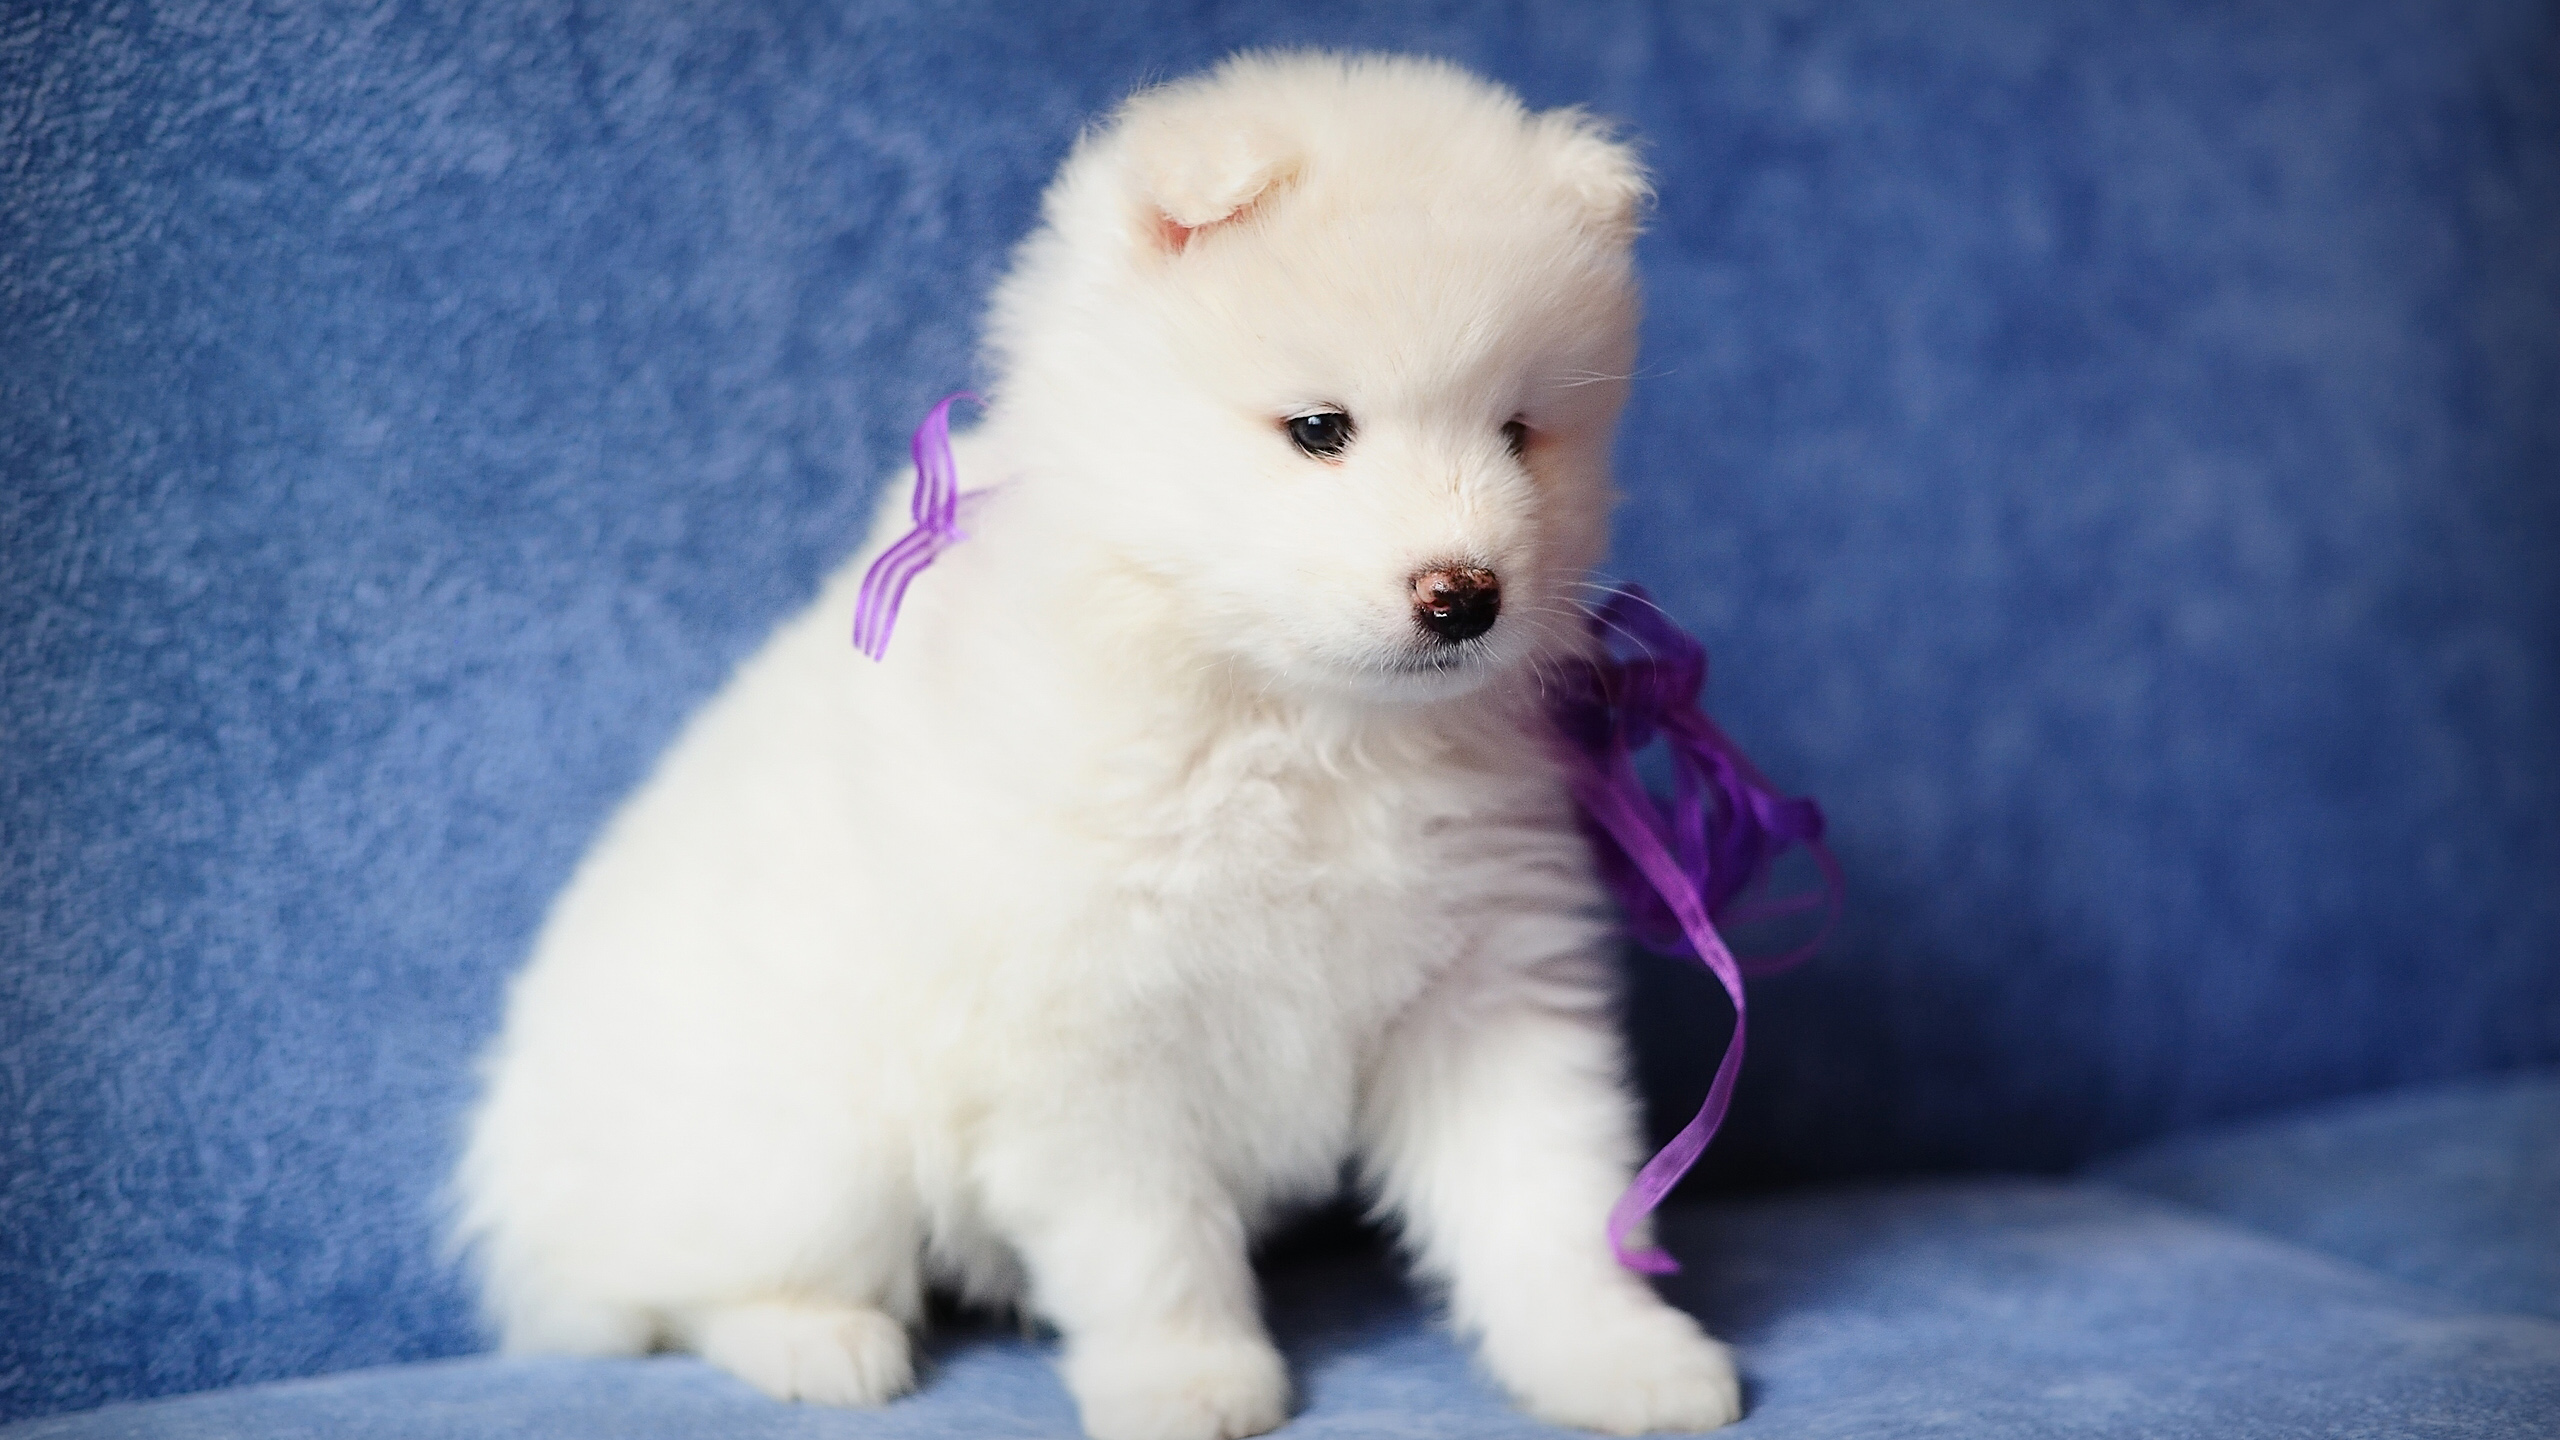 Cute White Puppy Is Sitting On Blue Couch With Purple Ribbon